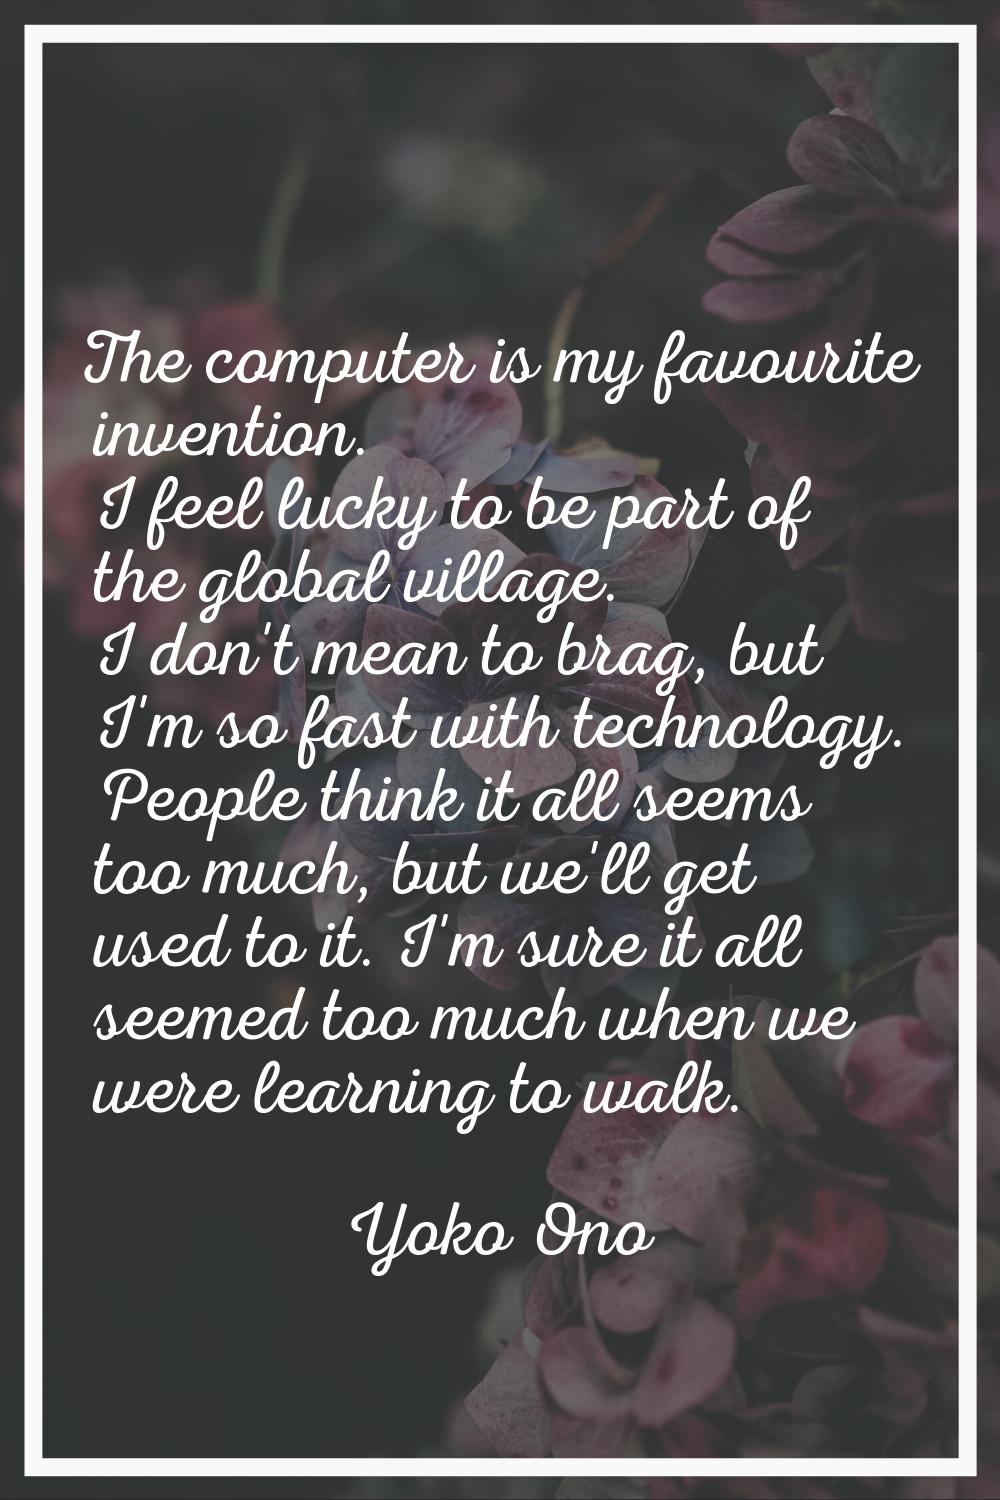 The computer is my favourite invention. I feel lucky to be part of the global village. I don't mean